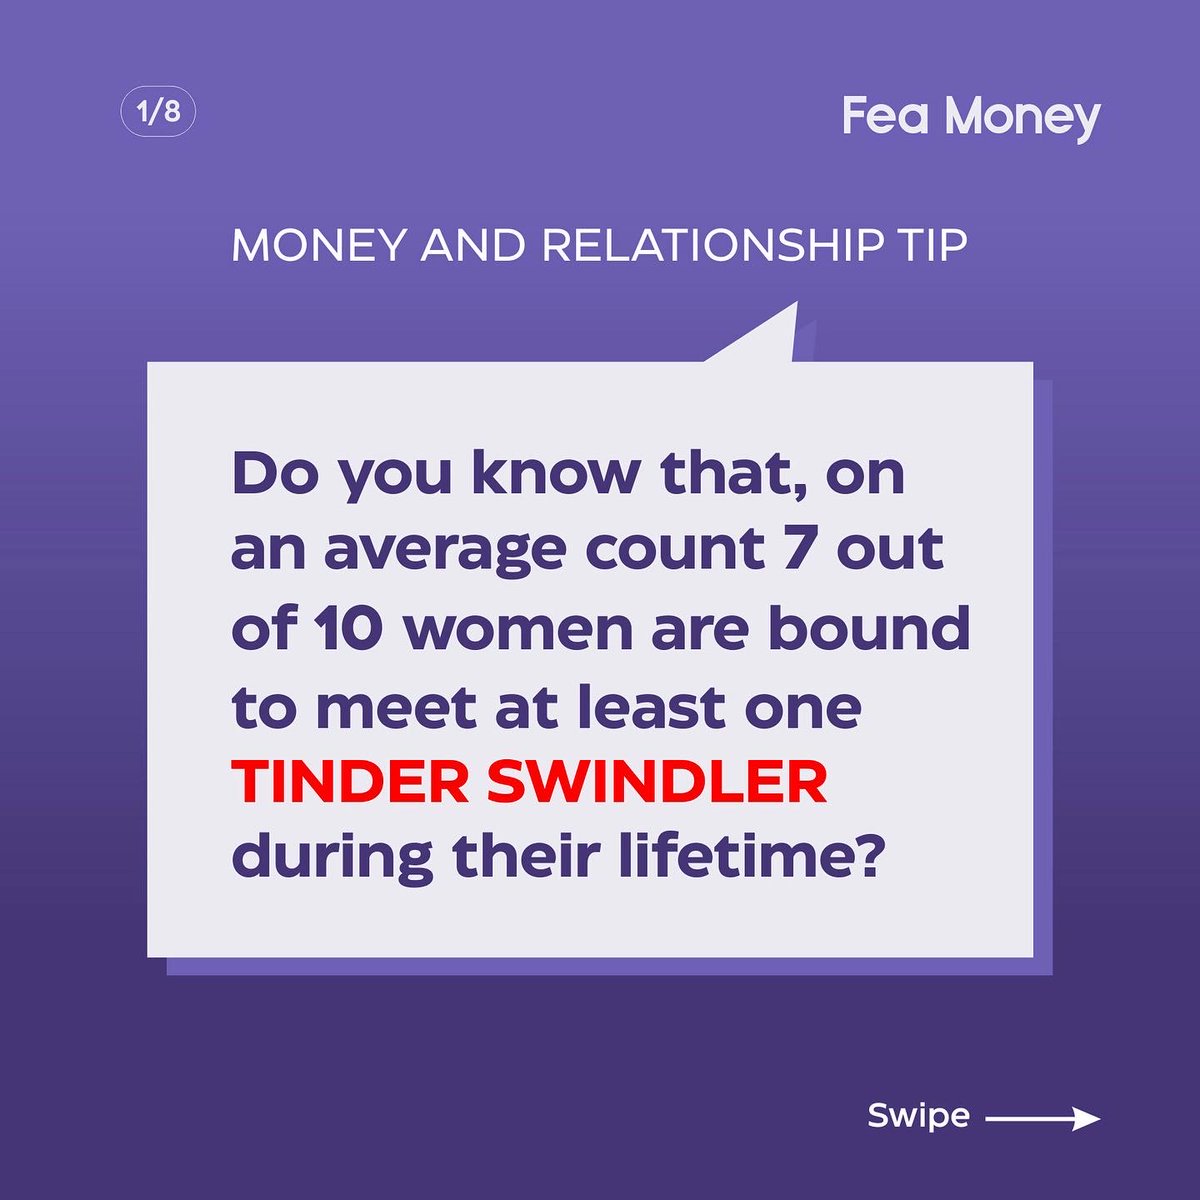 A great way to avoid a tinder swindler is by setting out agreed intentions and arrangements concerning any property/asset or debt owned individually or jointly in the event of a breakup/separation.

#feamoney #tinderswindler